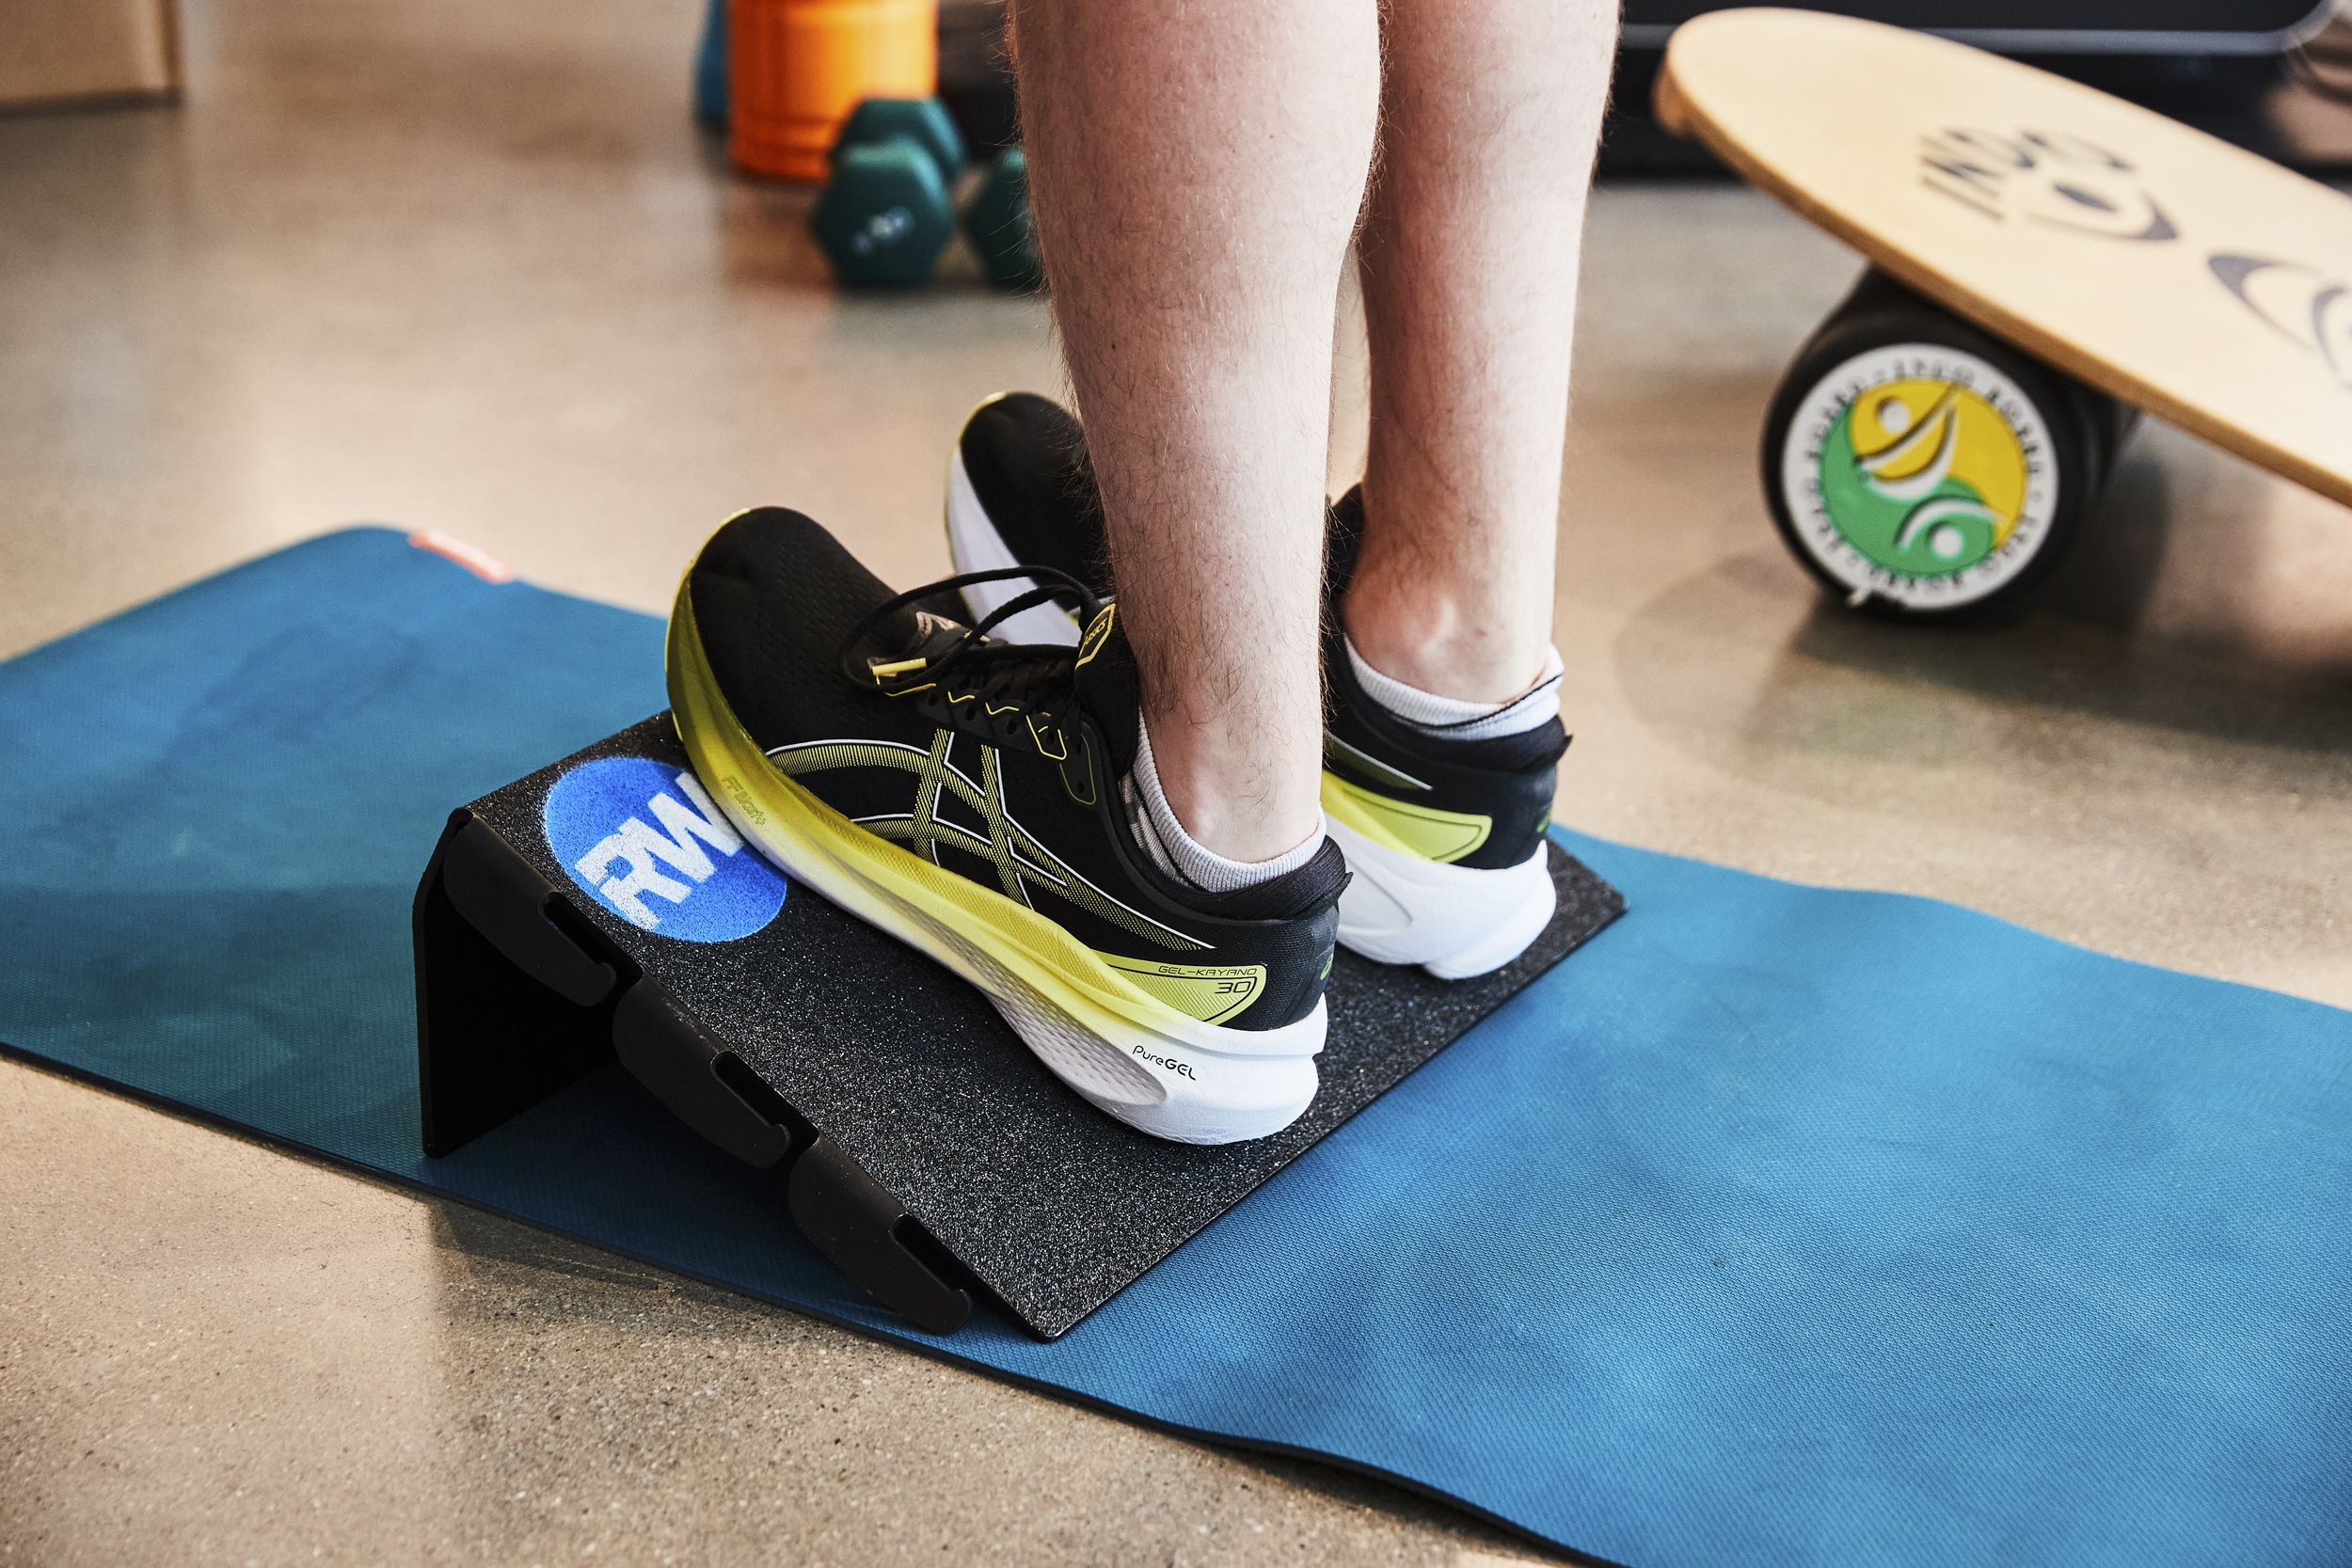 Best Surfaces for Balance Board Training